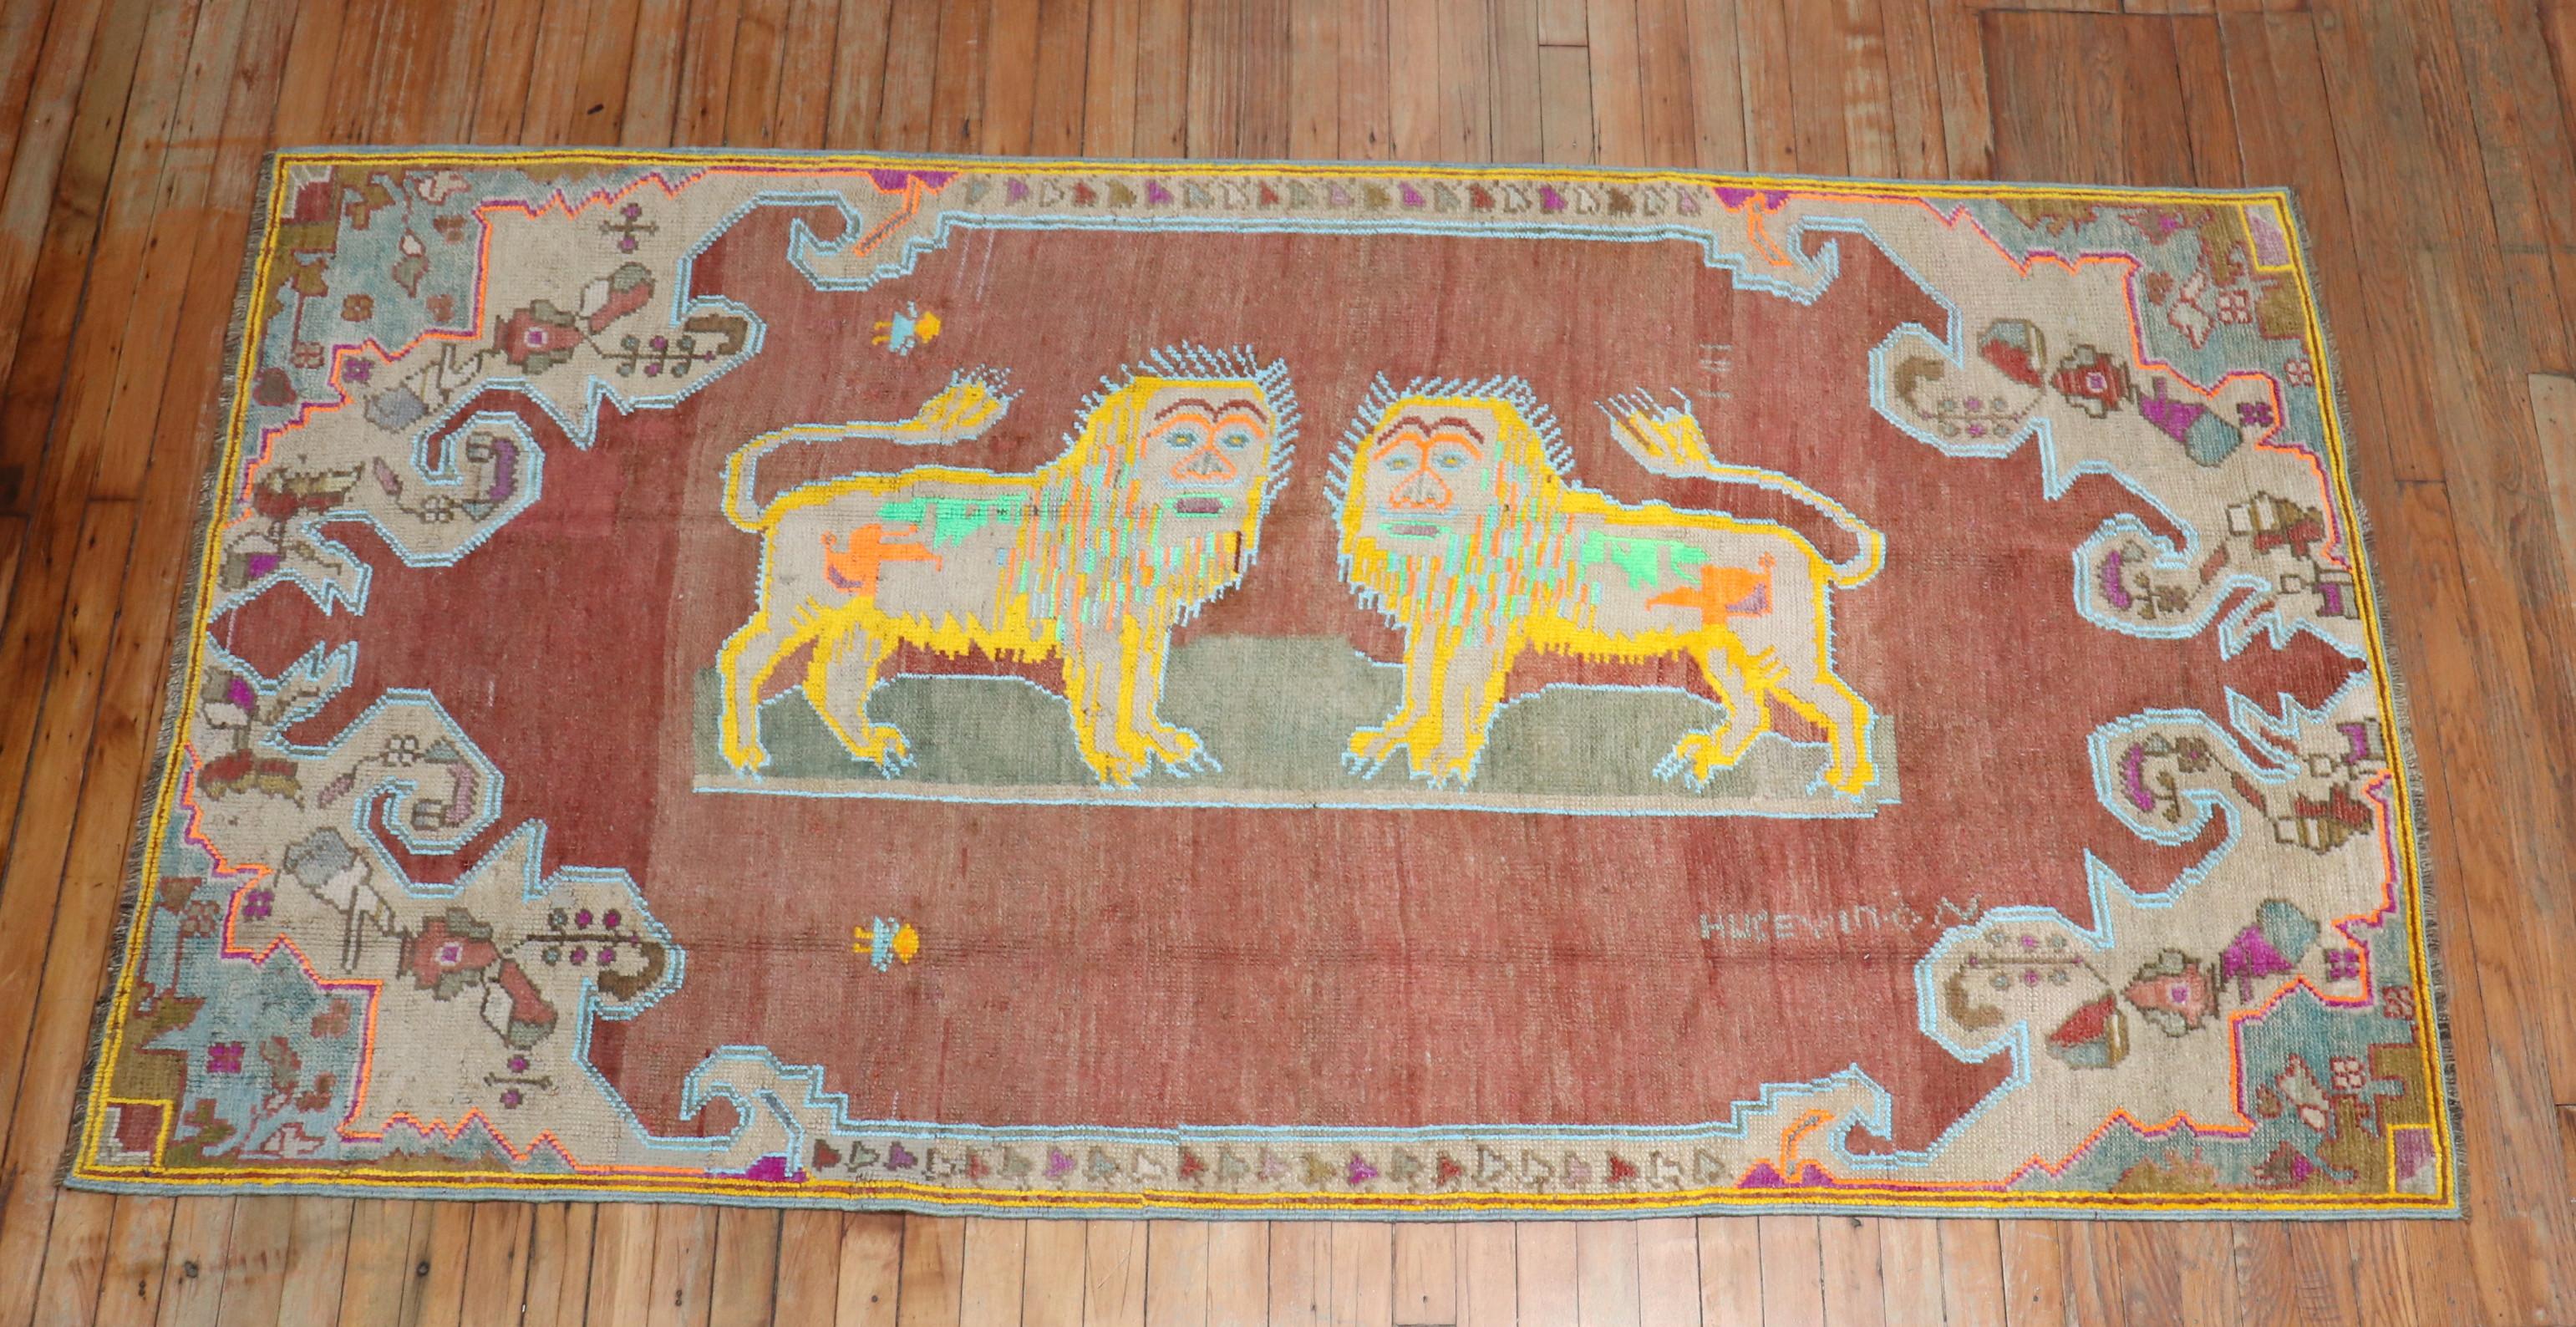 A mid-20th century pictorial double lion pictorial rug.

Measures: 4' x 7'7''.